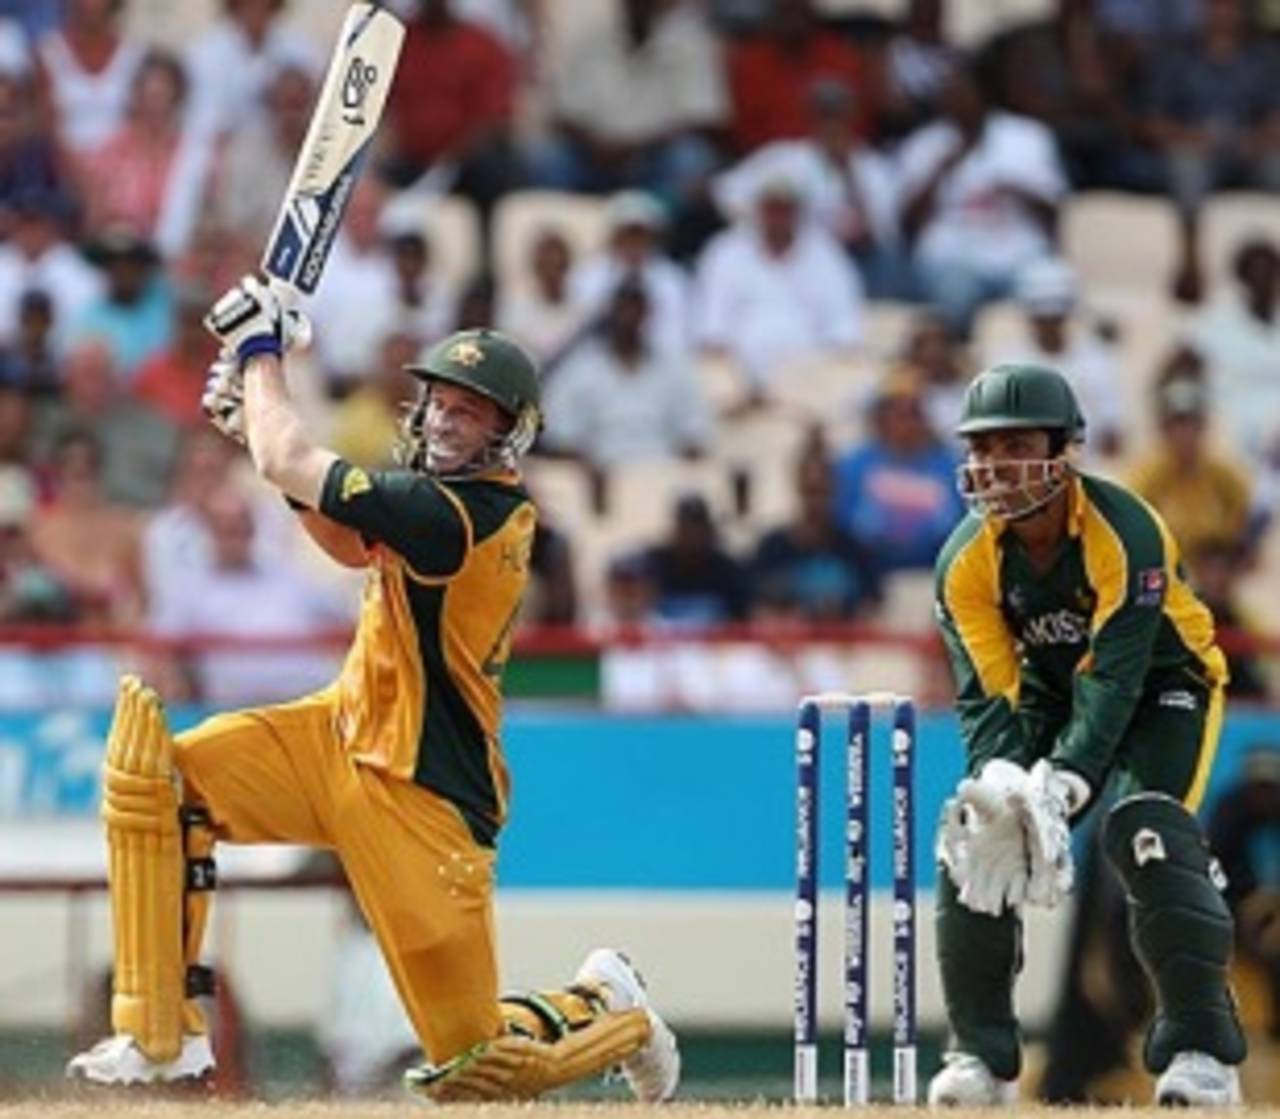 Michael Hussey targets Saeed Ajmal in the decisive final over of an absorbing contest&nbsp;&nbsp;&bull;&nbsp;&nbsp;Clive Rose/Getty Images